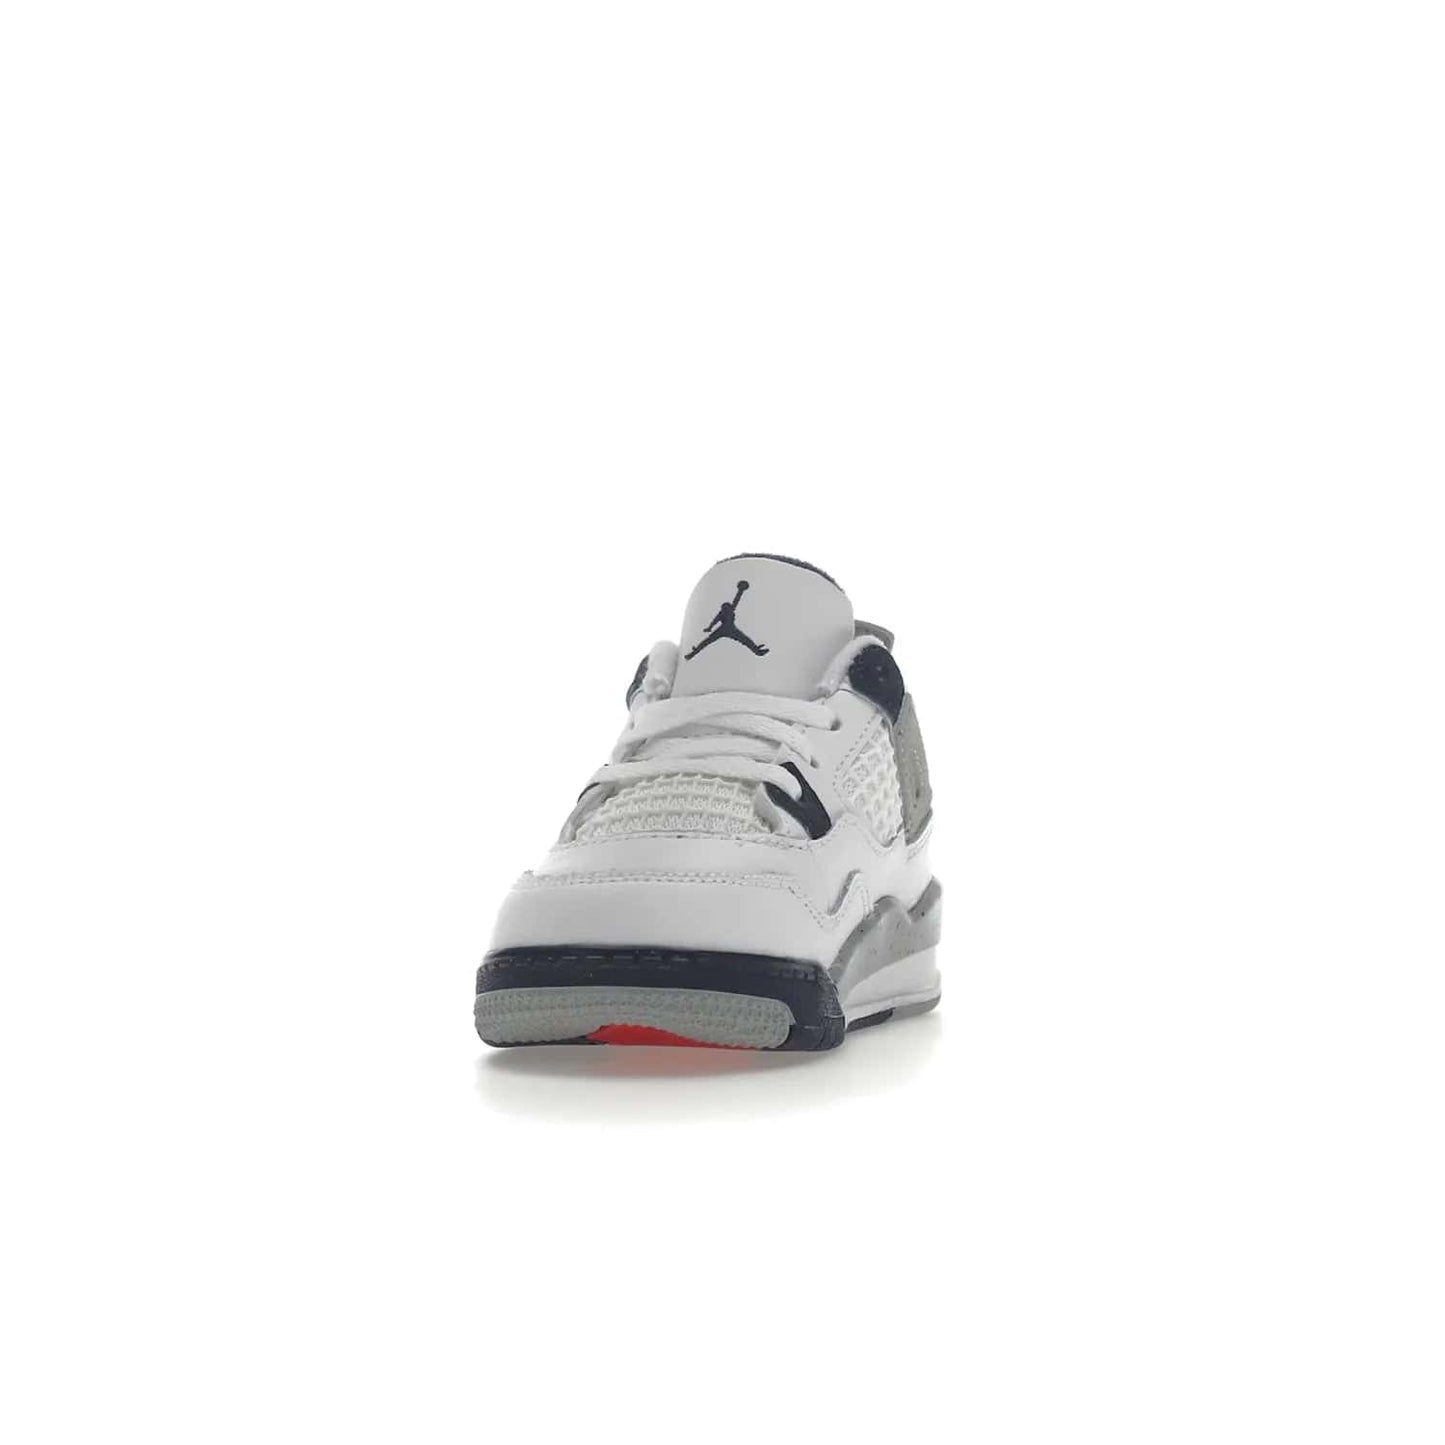 Jordan 4 Retro Midnight Navy (TD) - Image 12 - Only at www.BallersClubKickz.com - Introducing the Jordan 4 Retro Midnight Navy (TD) for kids. White leather upper with navy and grey accents plus fire red detailing. Perfect for everyday wear. Get yours before they sell out.